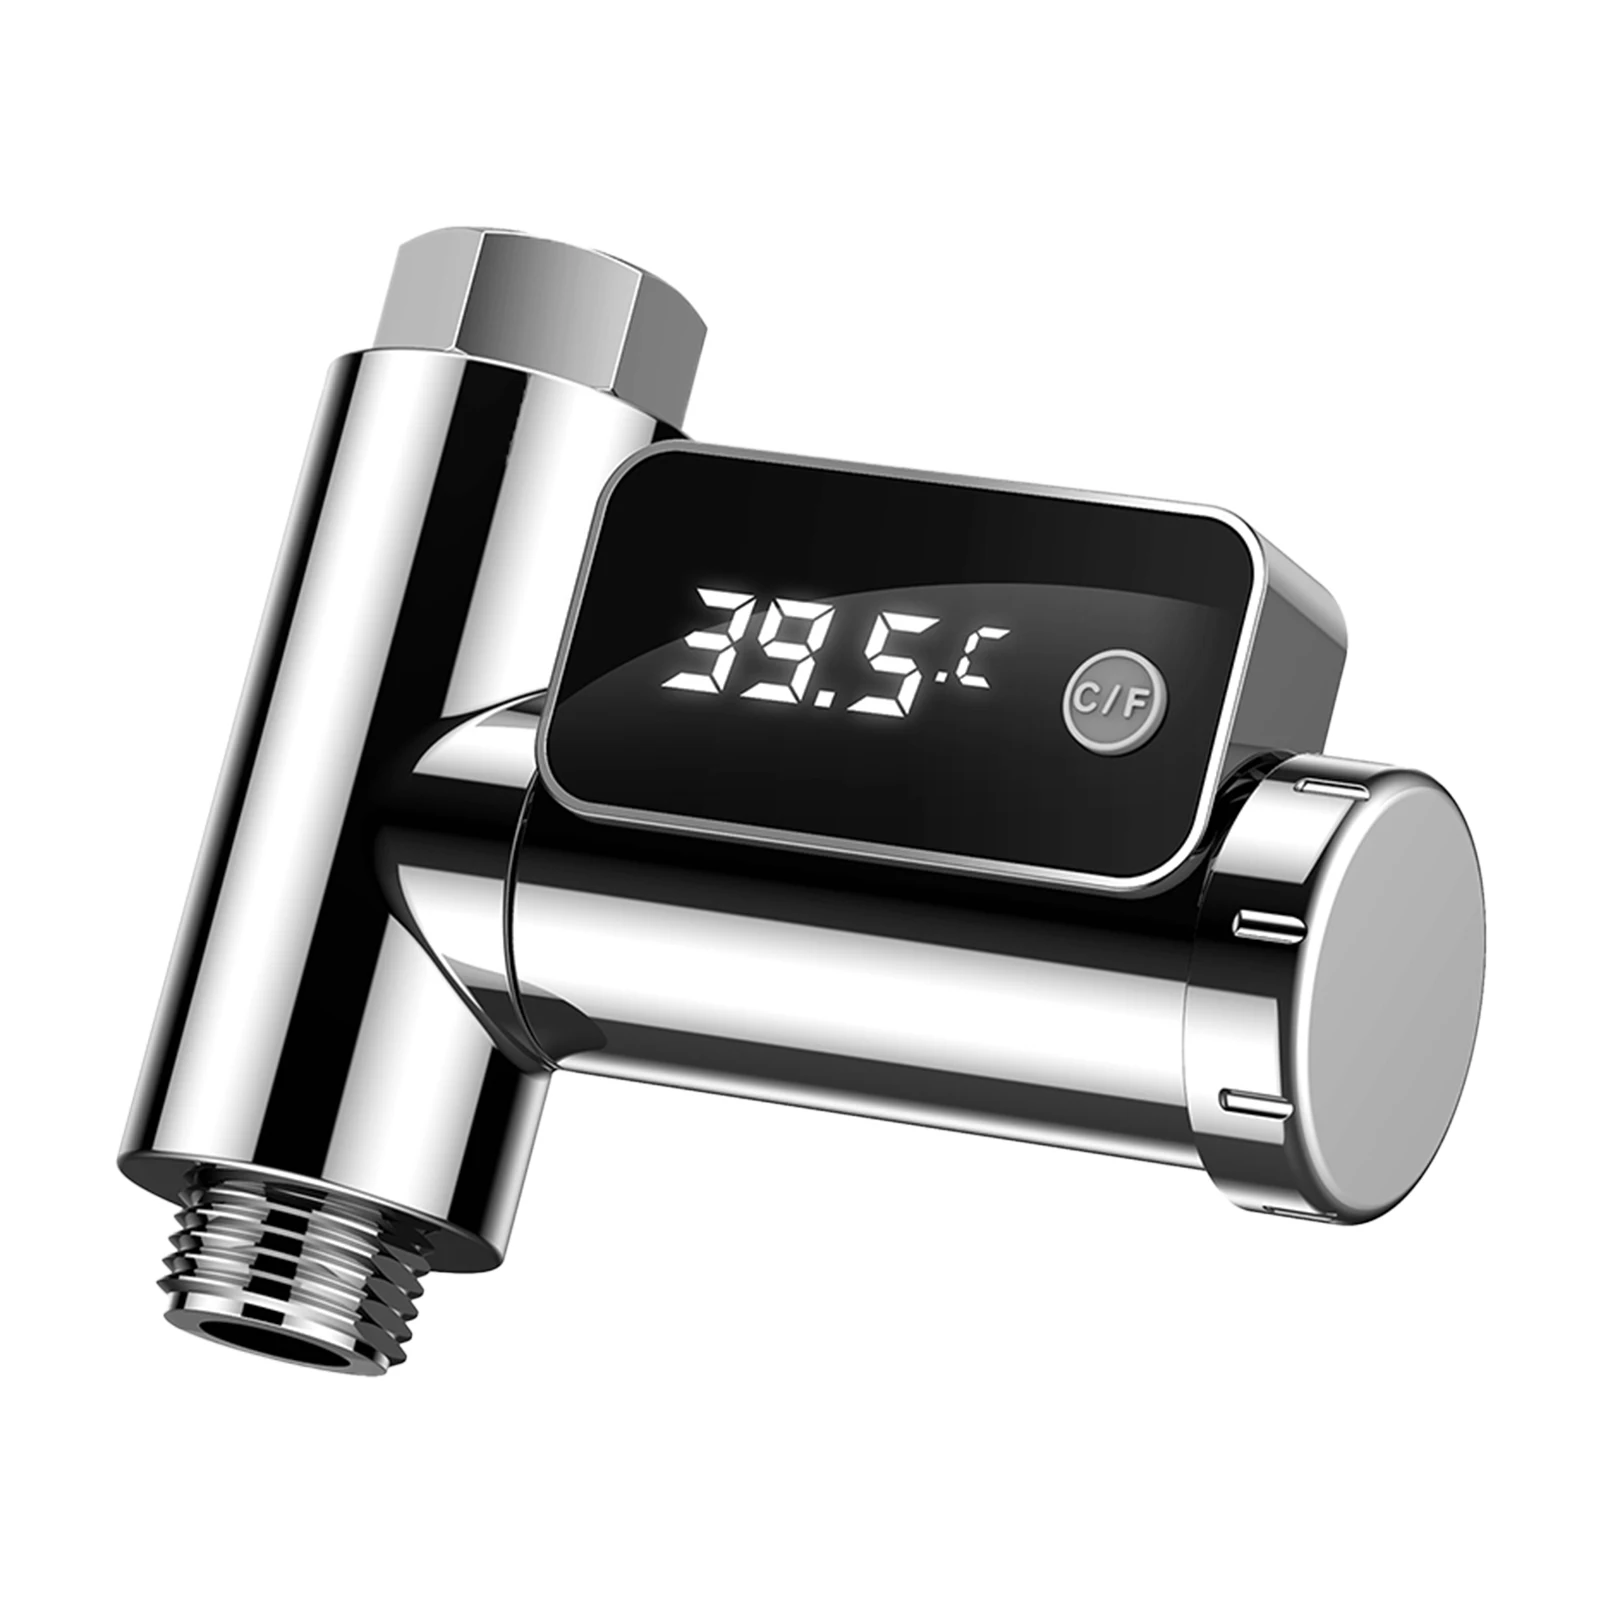 

Shower Thermometer Waterproof 360 Rotating Water Temperature ABS For Baby Measuring Home LED Digital Monitor Accurate Bathroom